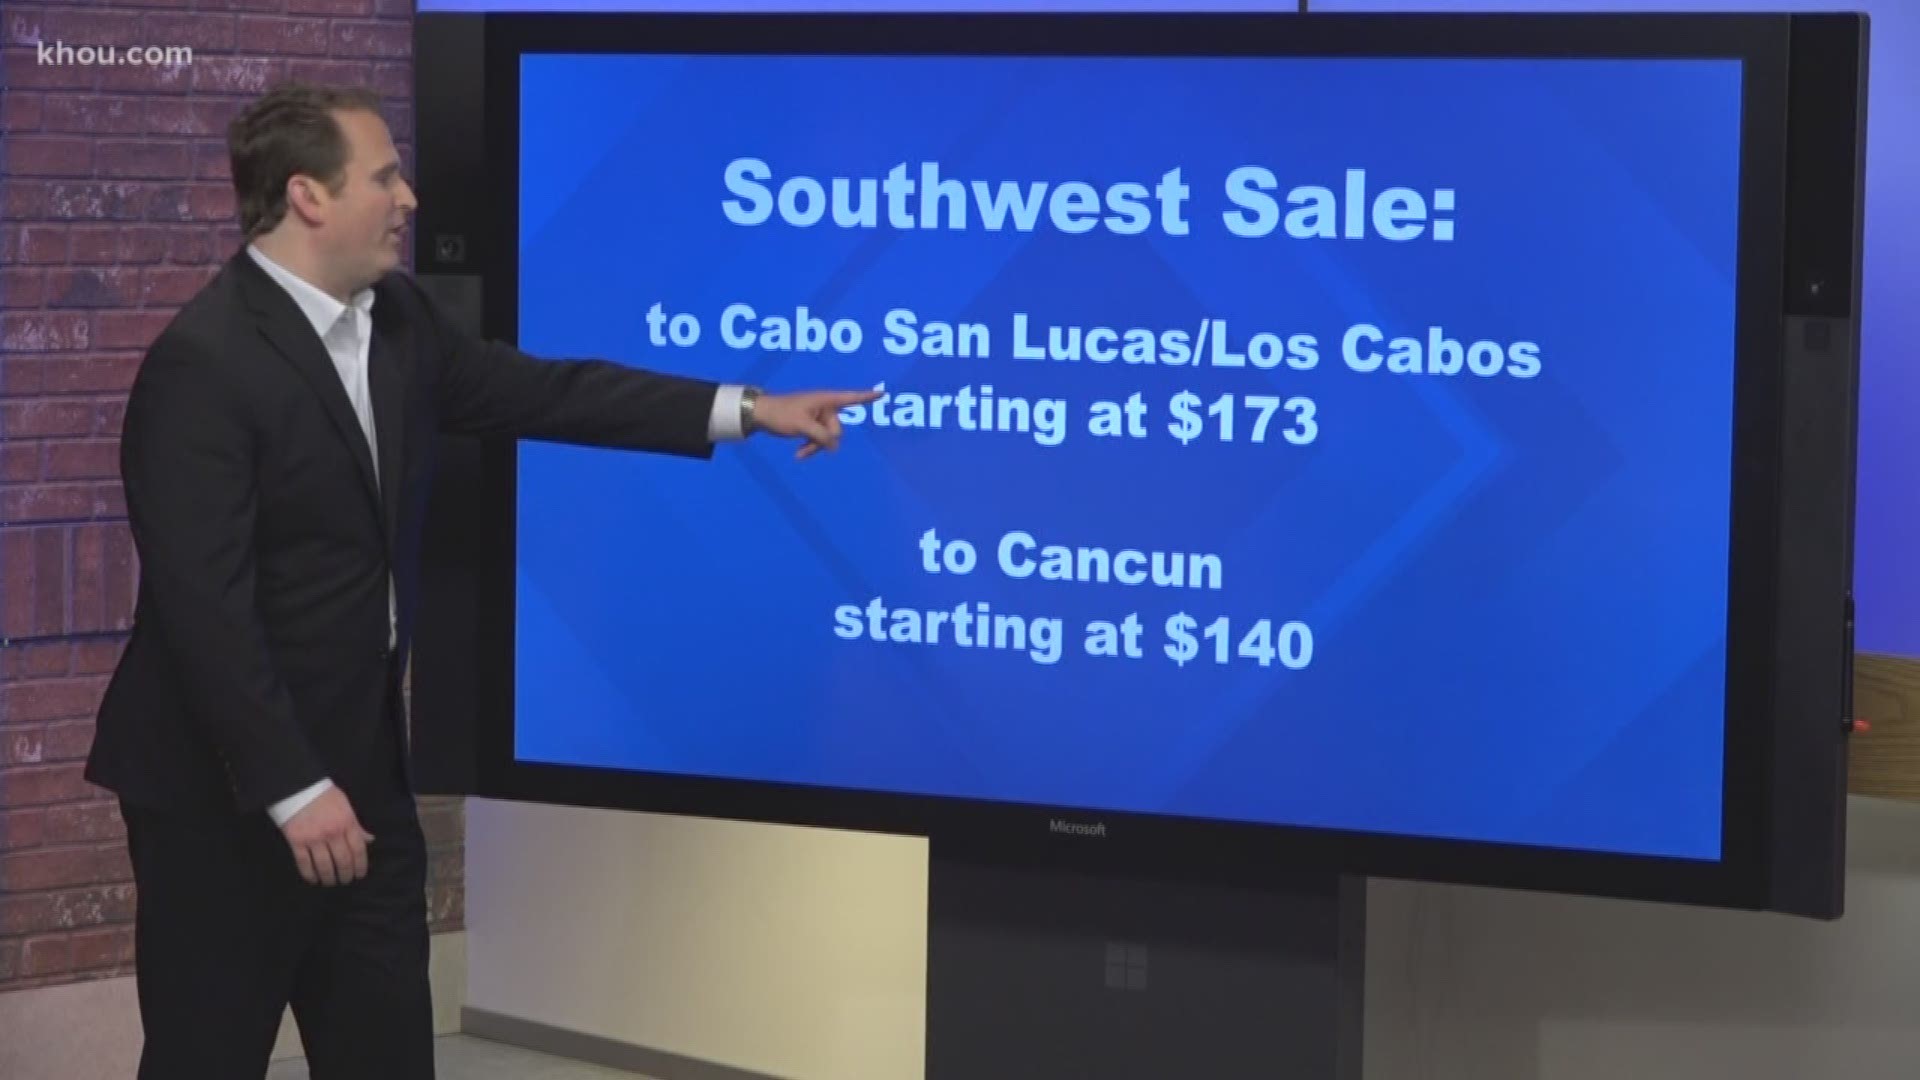 Get ready to buy air tickets for your spring travel plans. Southwest Airlines is advertising its nationwide sale right now. The sale lasts until midnight on Thursday night.